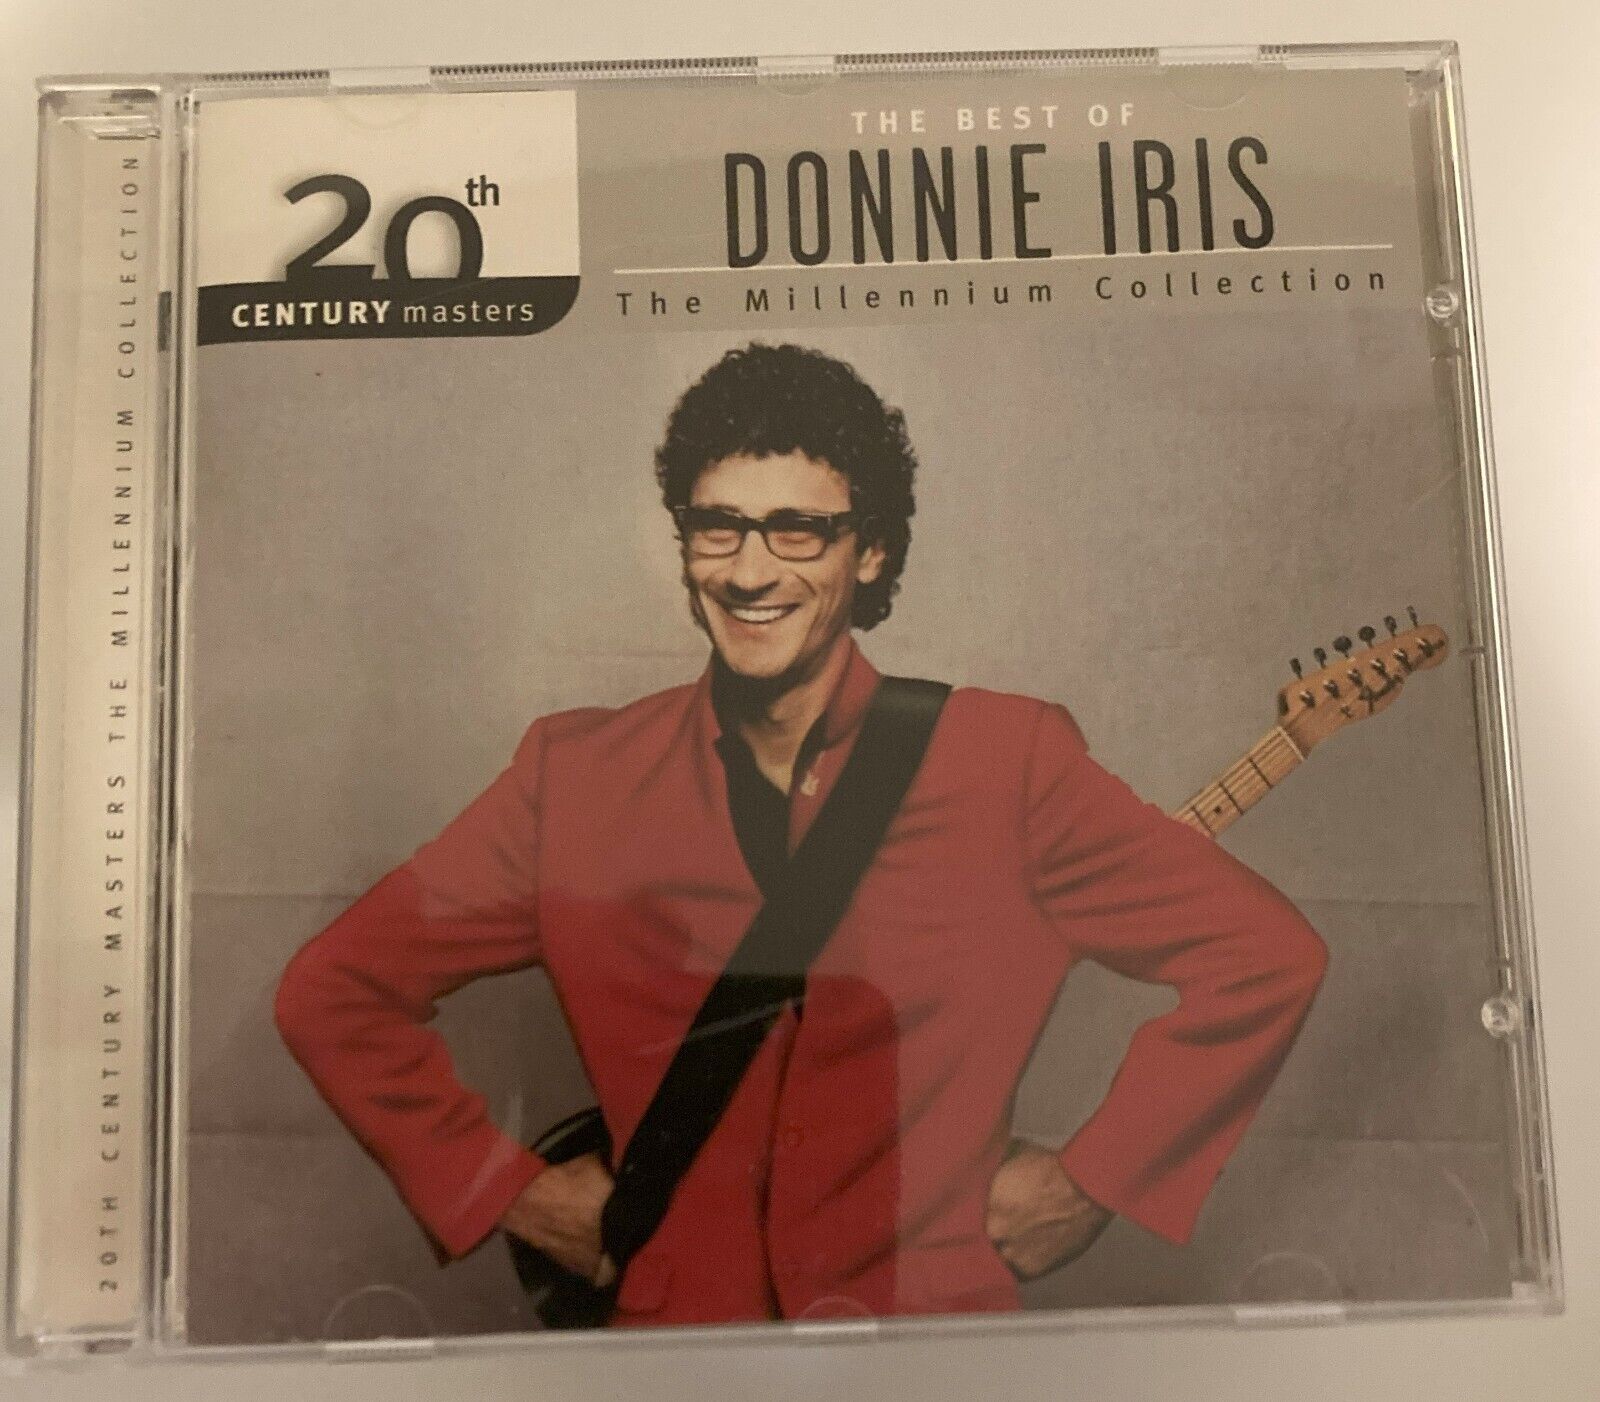 THE BEST OF DONNIE IRIS THE MILLENNIUM COLLECTION - CLEAN MUSIC CD - 2001 MCA